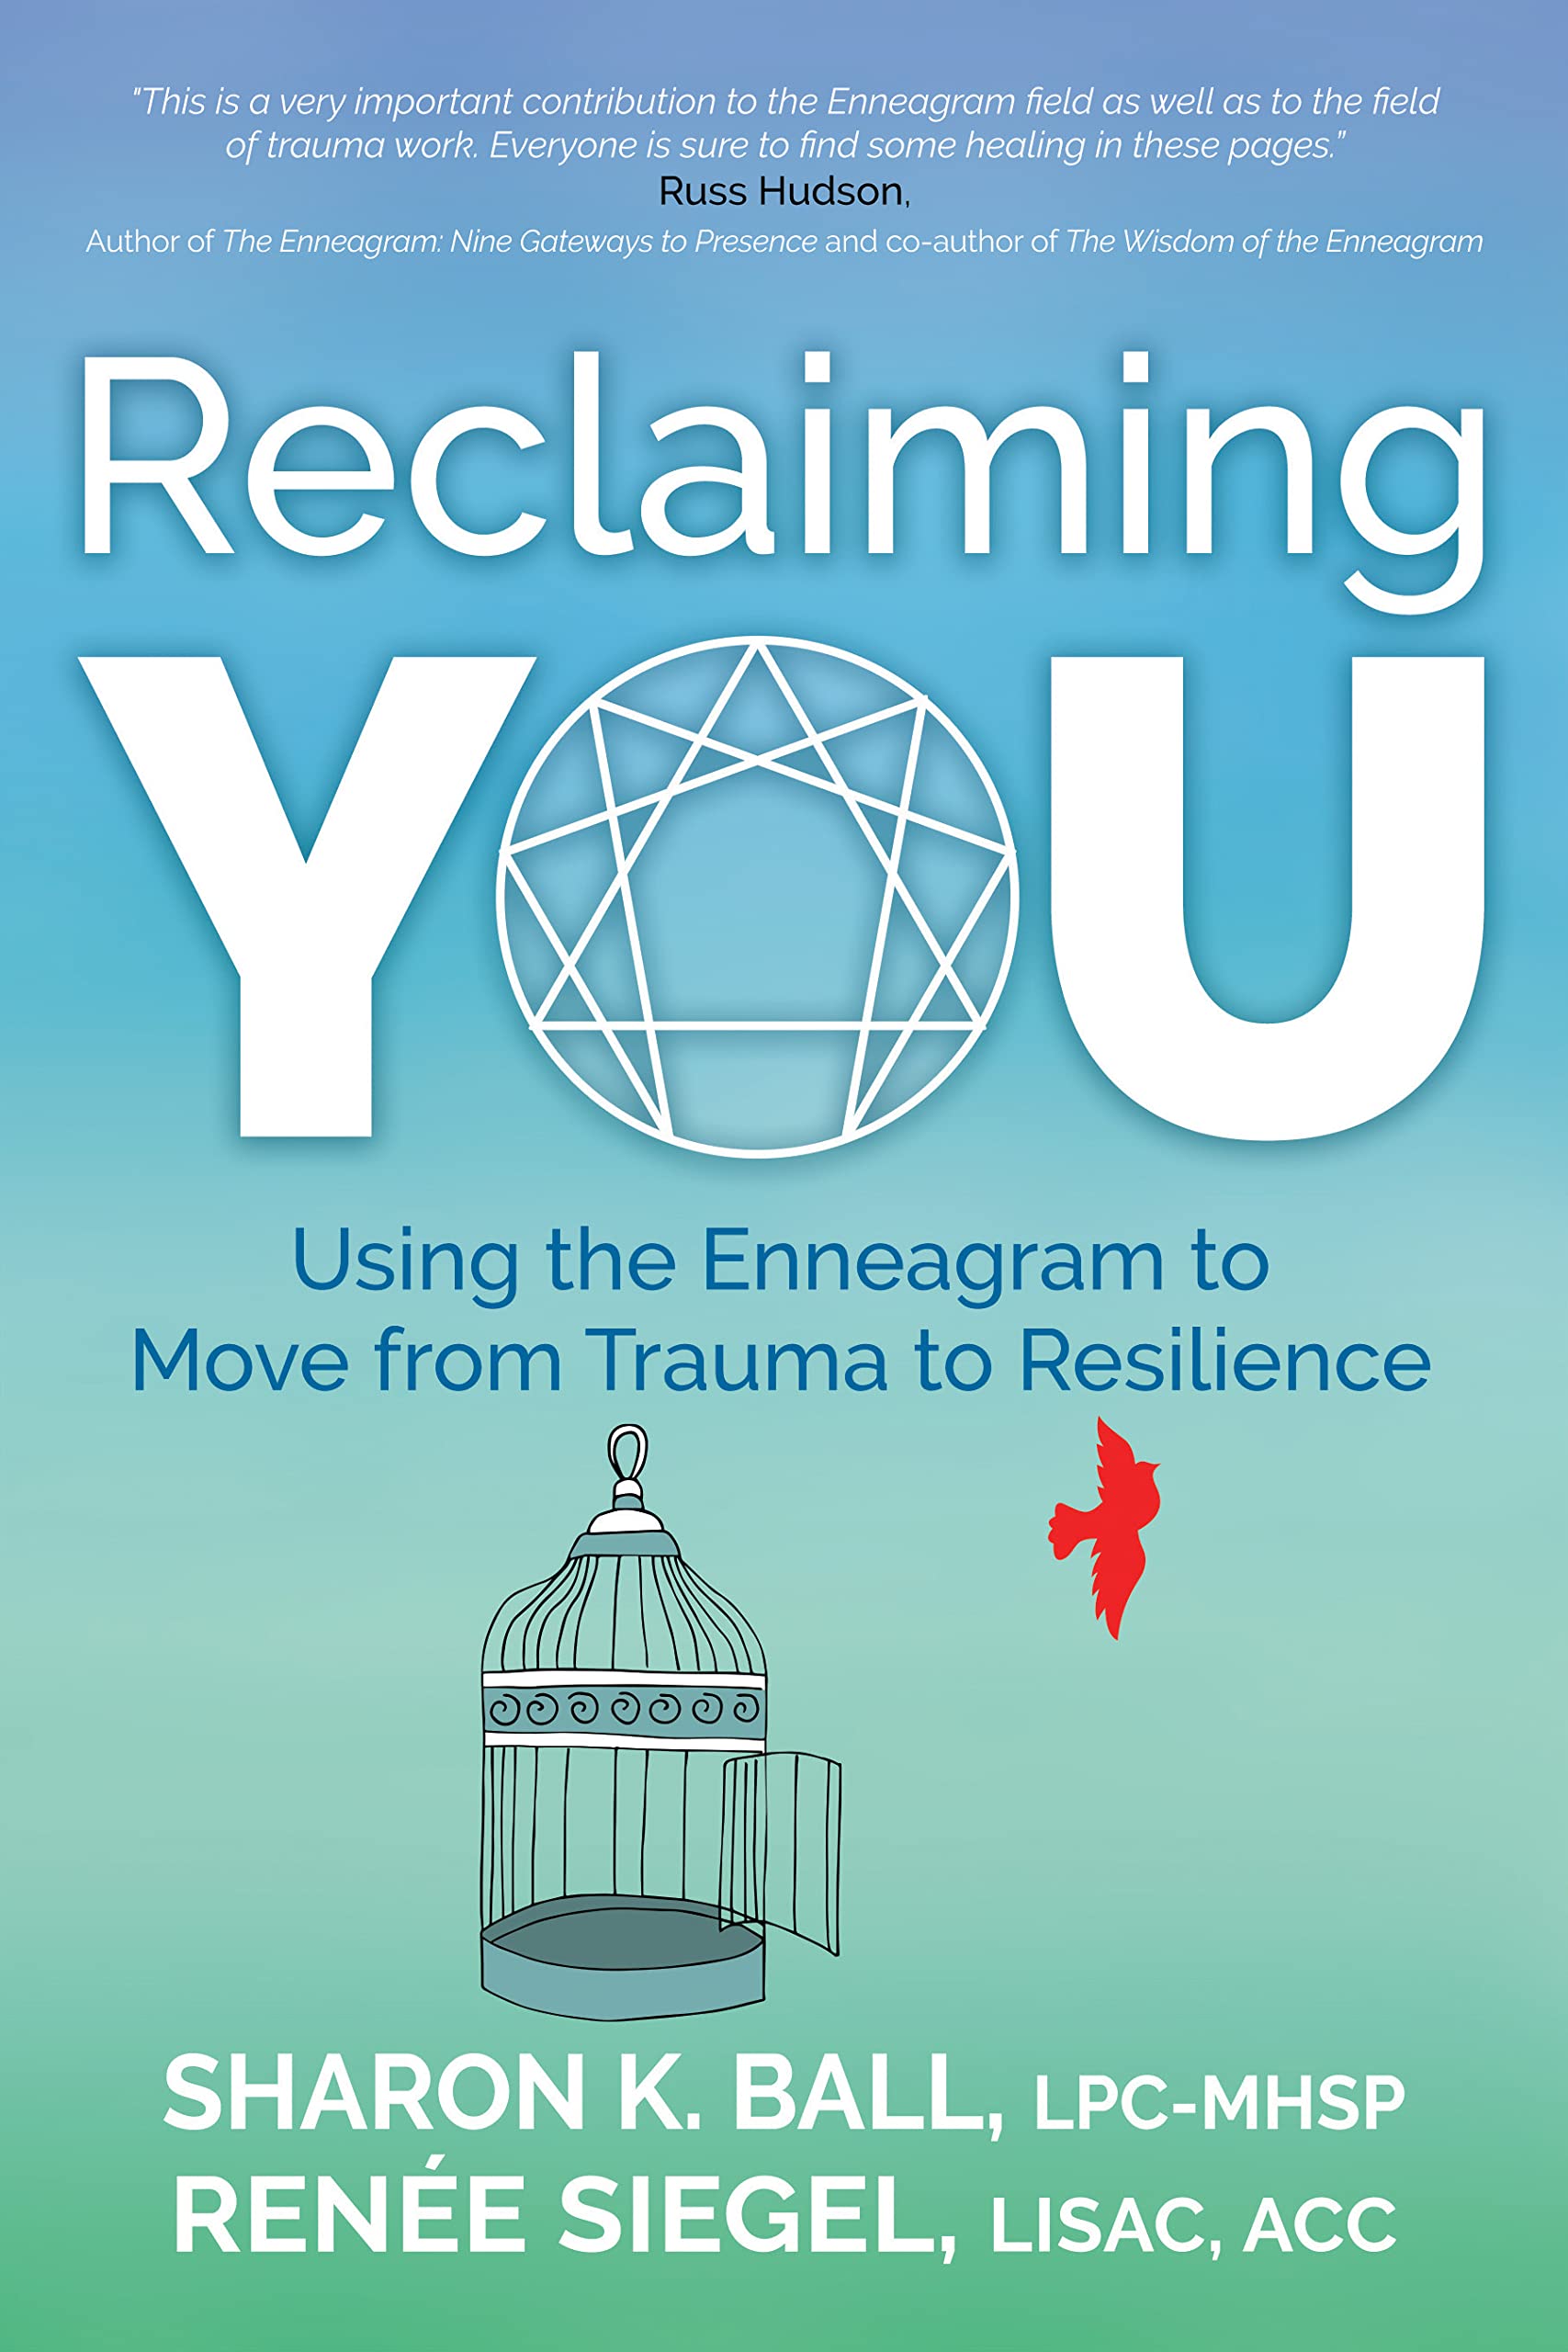 trauma book - Reclaiming You: Using the Enneagram to Move from Trauma to Resilience